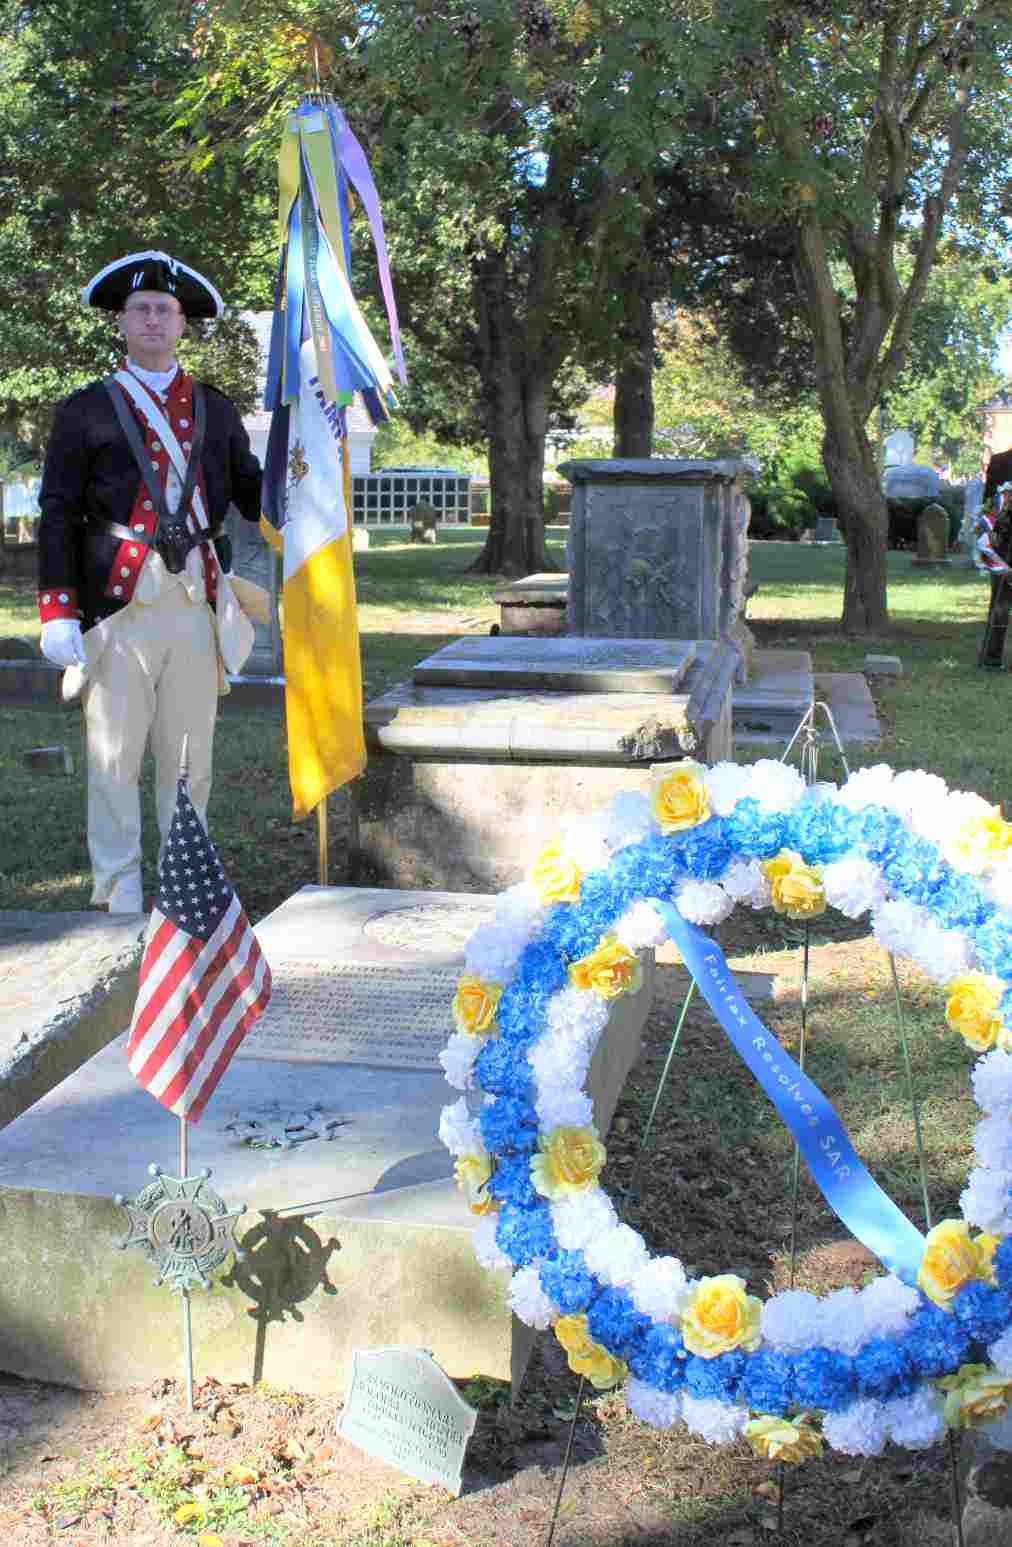 Compatriot Darrin Schmidt with the Fairfax Resolves wreath at the grave of Thomas Nelson Jr.